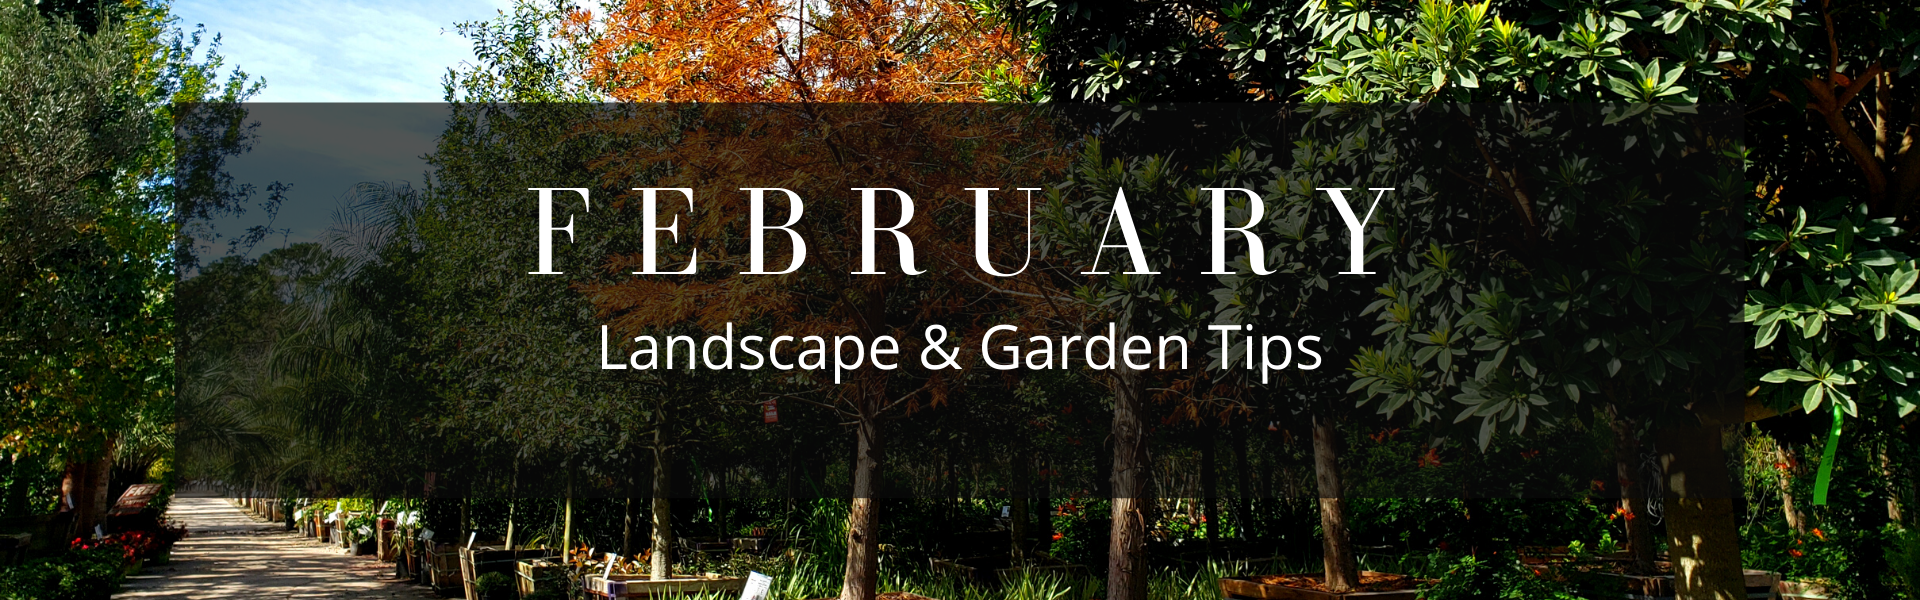 February Landscape and Garden Tips